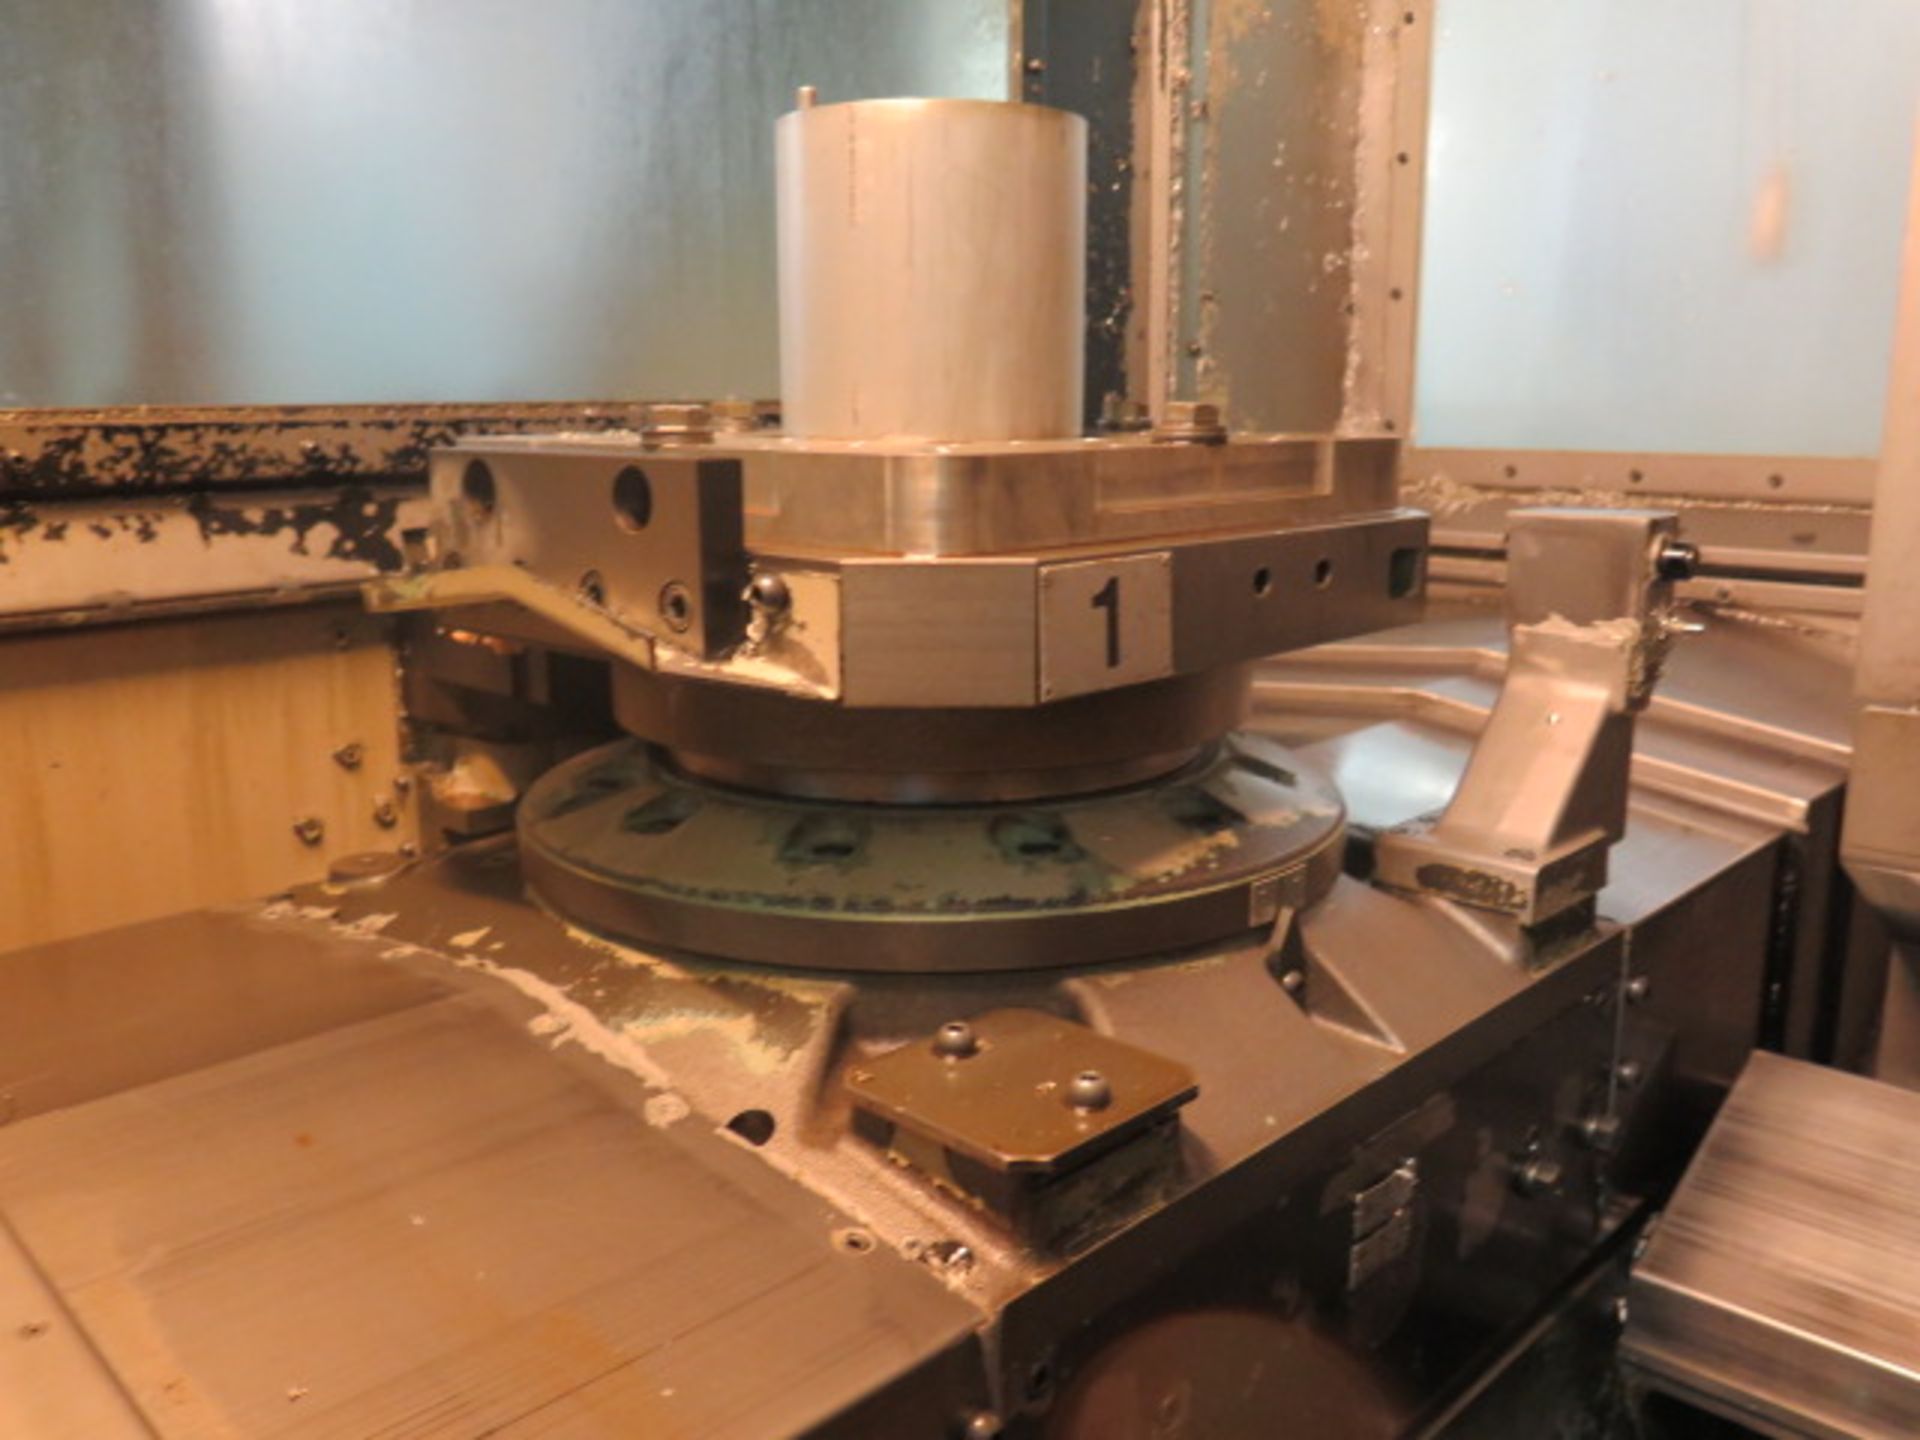 Hitachi Seiki HG400 III 2-Pallet 4-Axis CNC Horizontal Machining Center s/n HG43622 w/ SOLD AS IS - Image 5 of 25